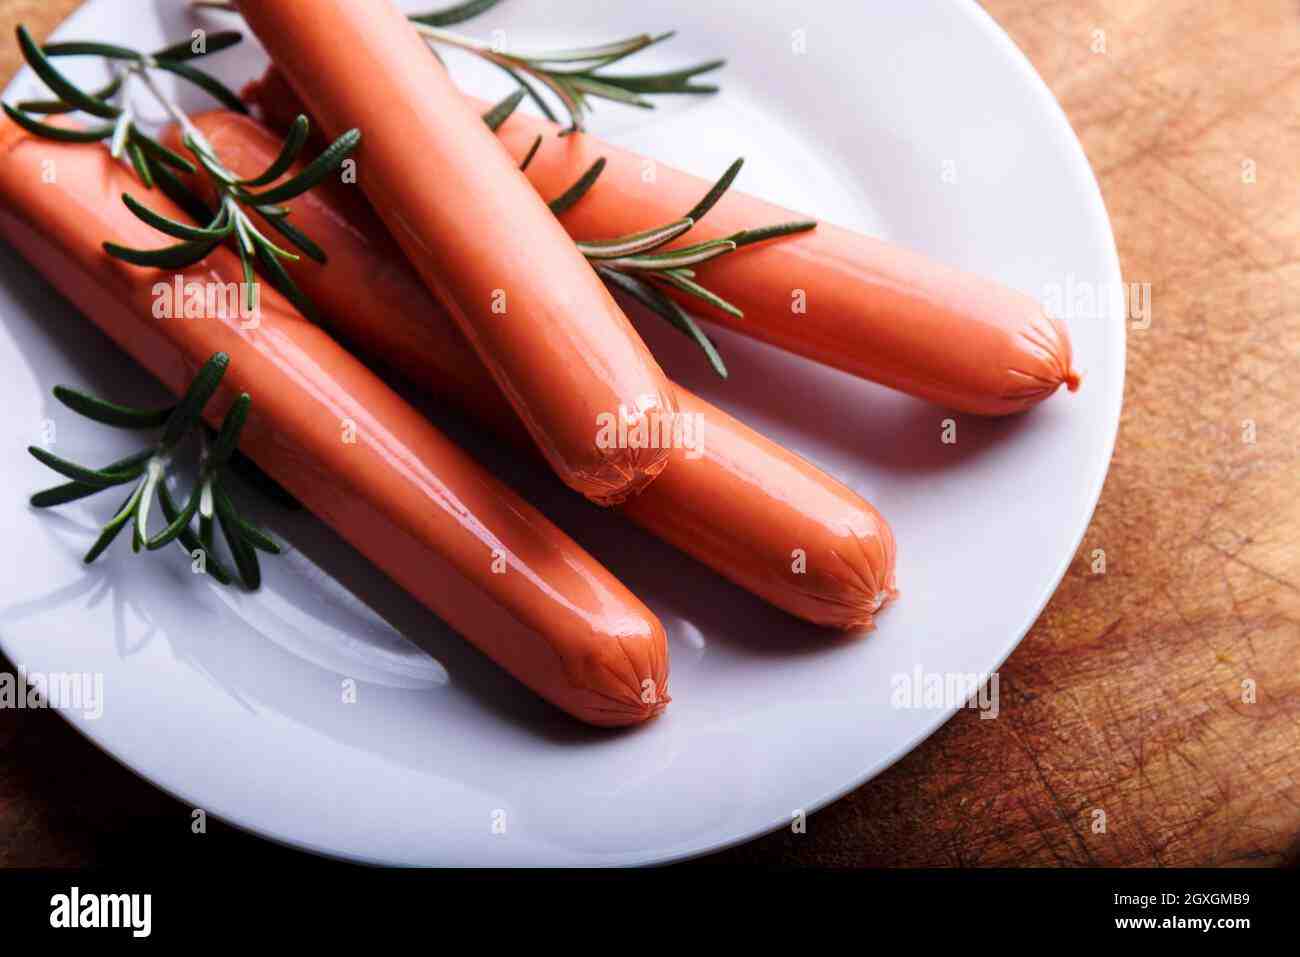 What is the difference between a frankfurter and a saveloy?